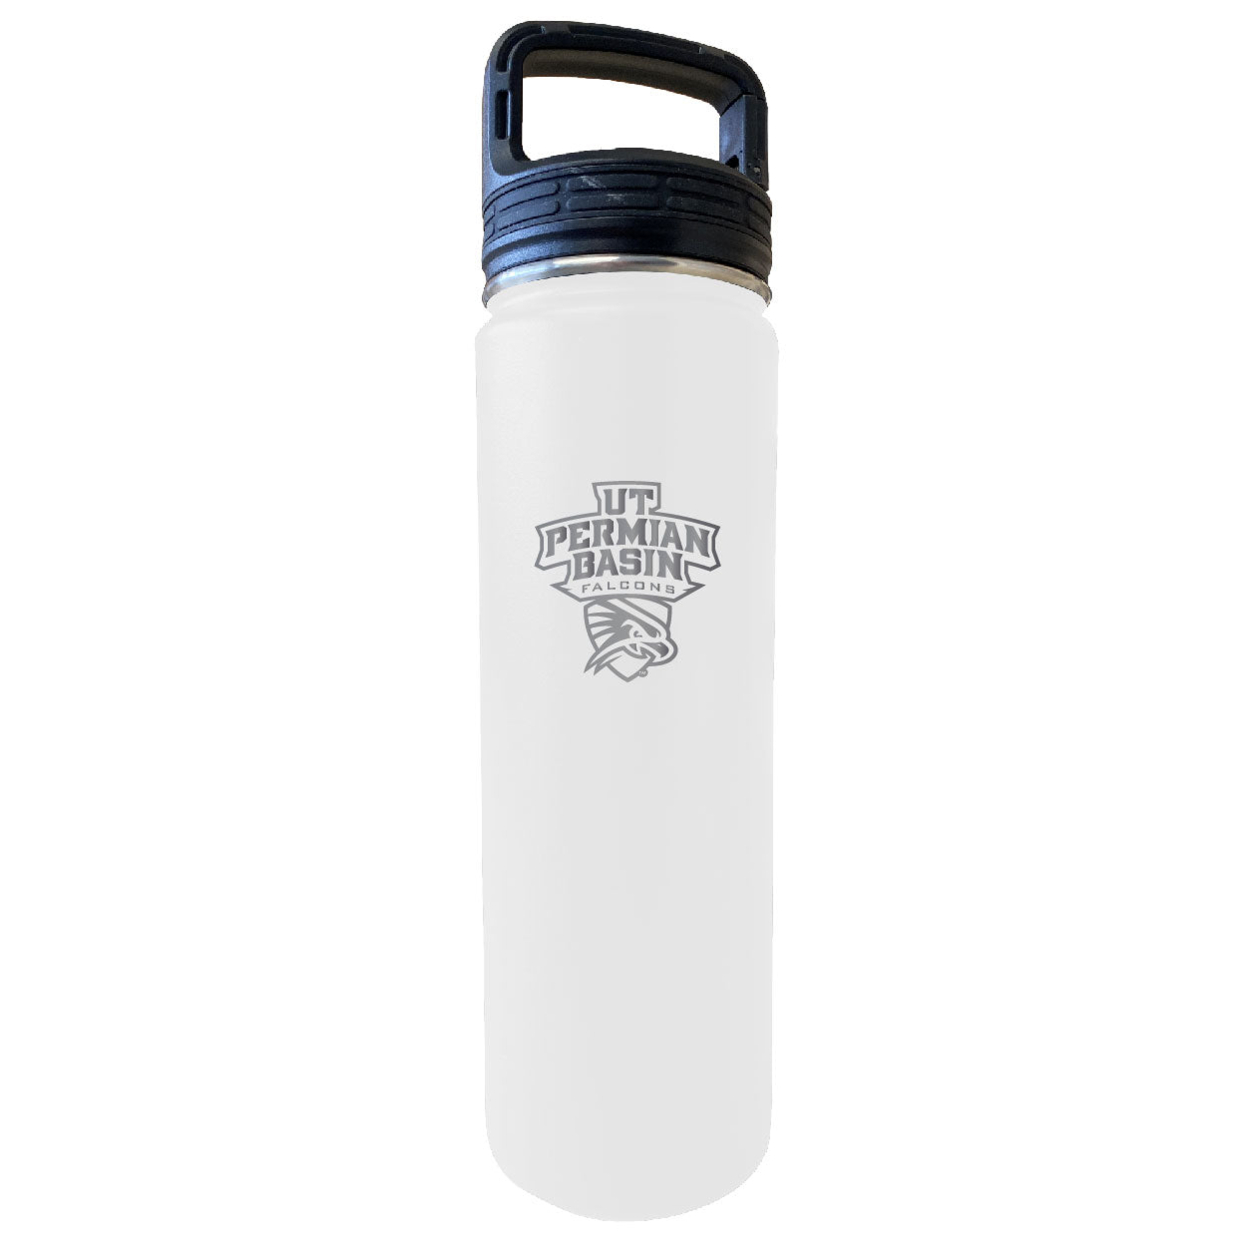 University Of Texas Of The Permian Basin 32 Oz Engraved Insulated Double Wall Stainless Steel Water Bottle Tumbler (White)